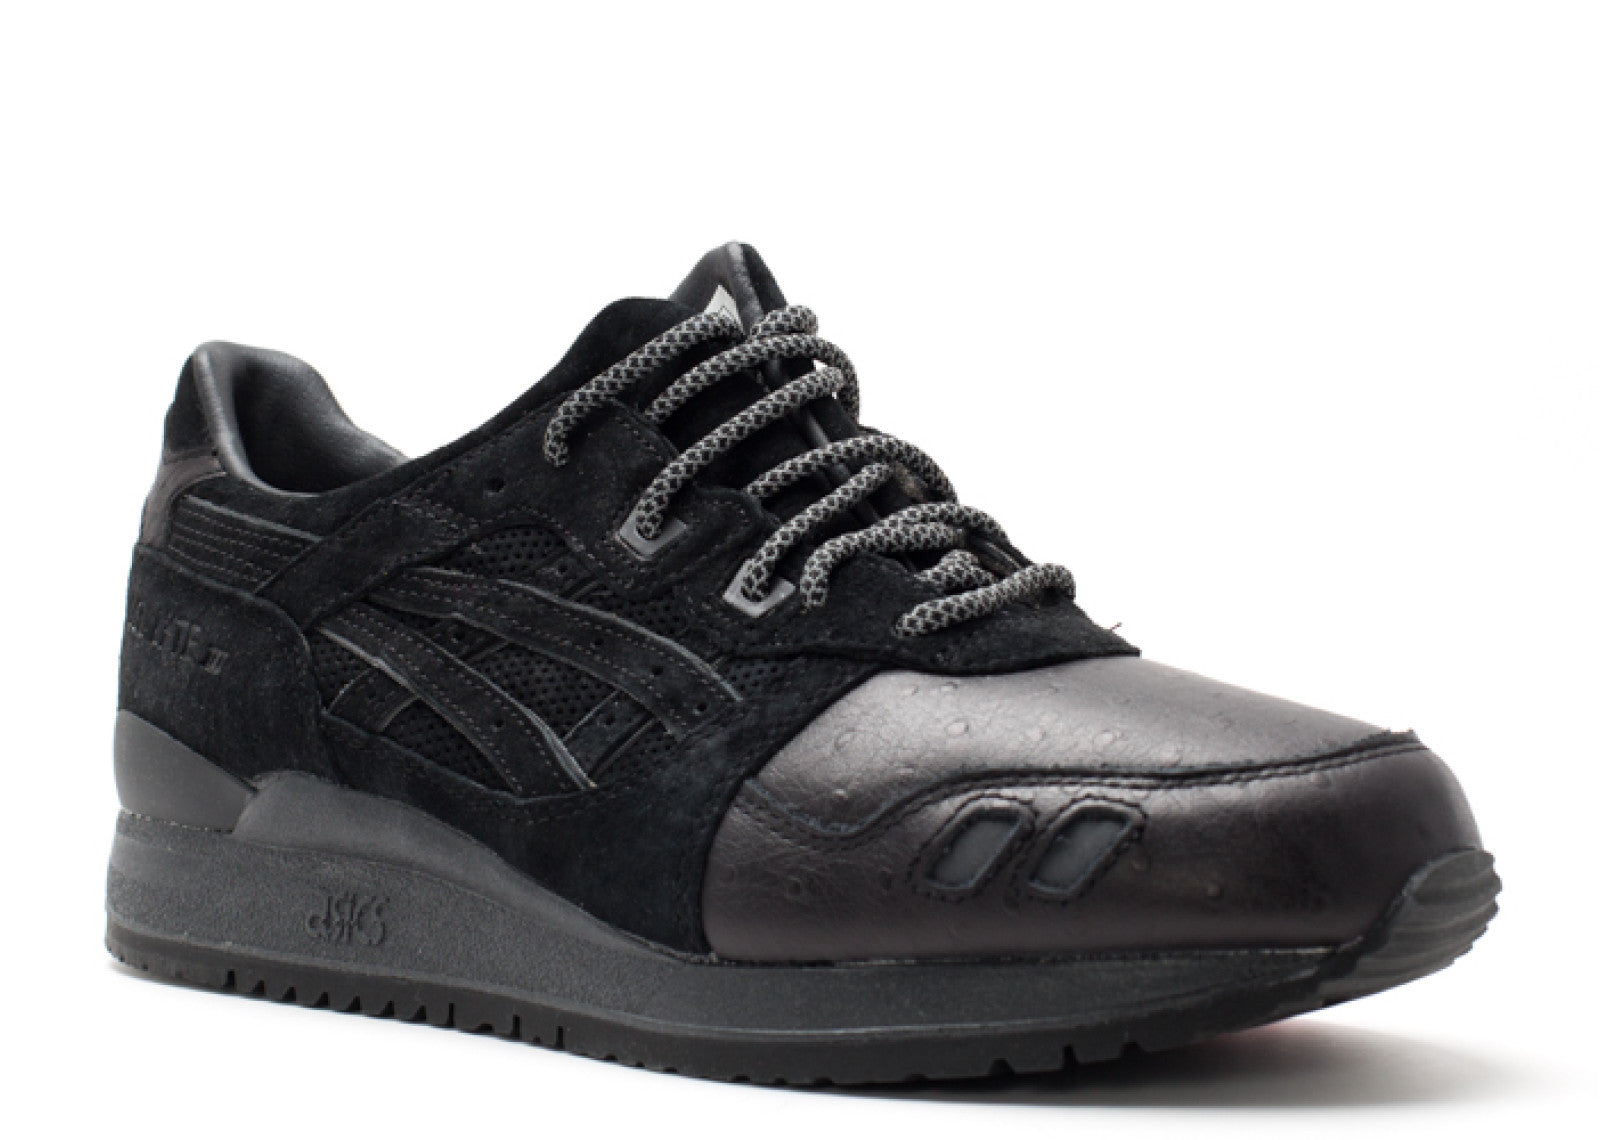 ASICS SOLEFLY HAVEN" – Soleciety